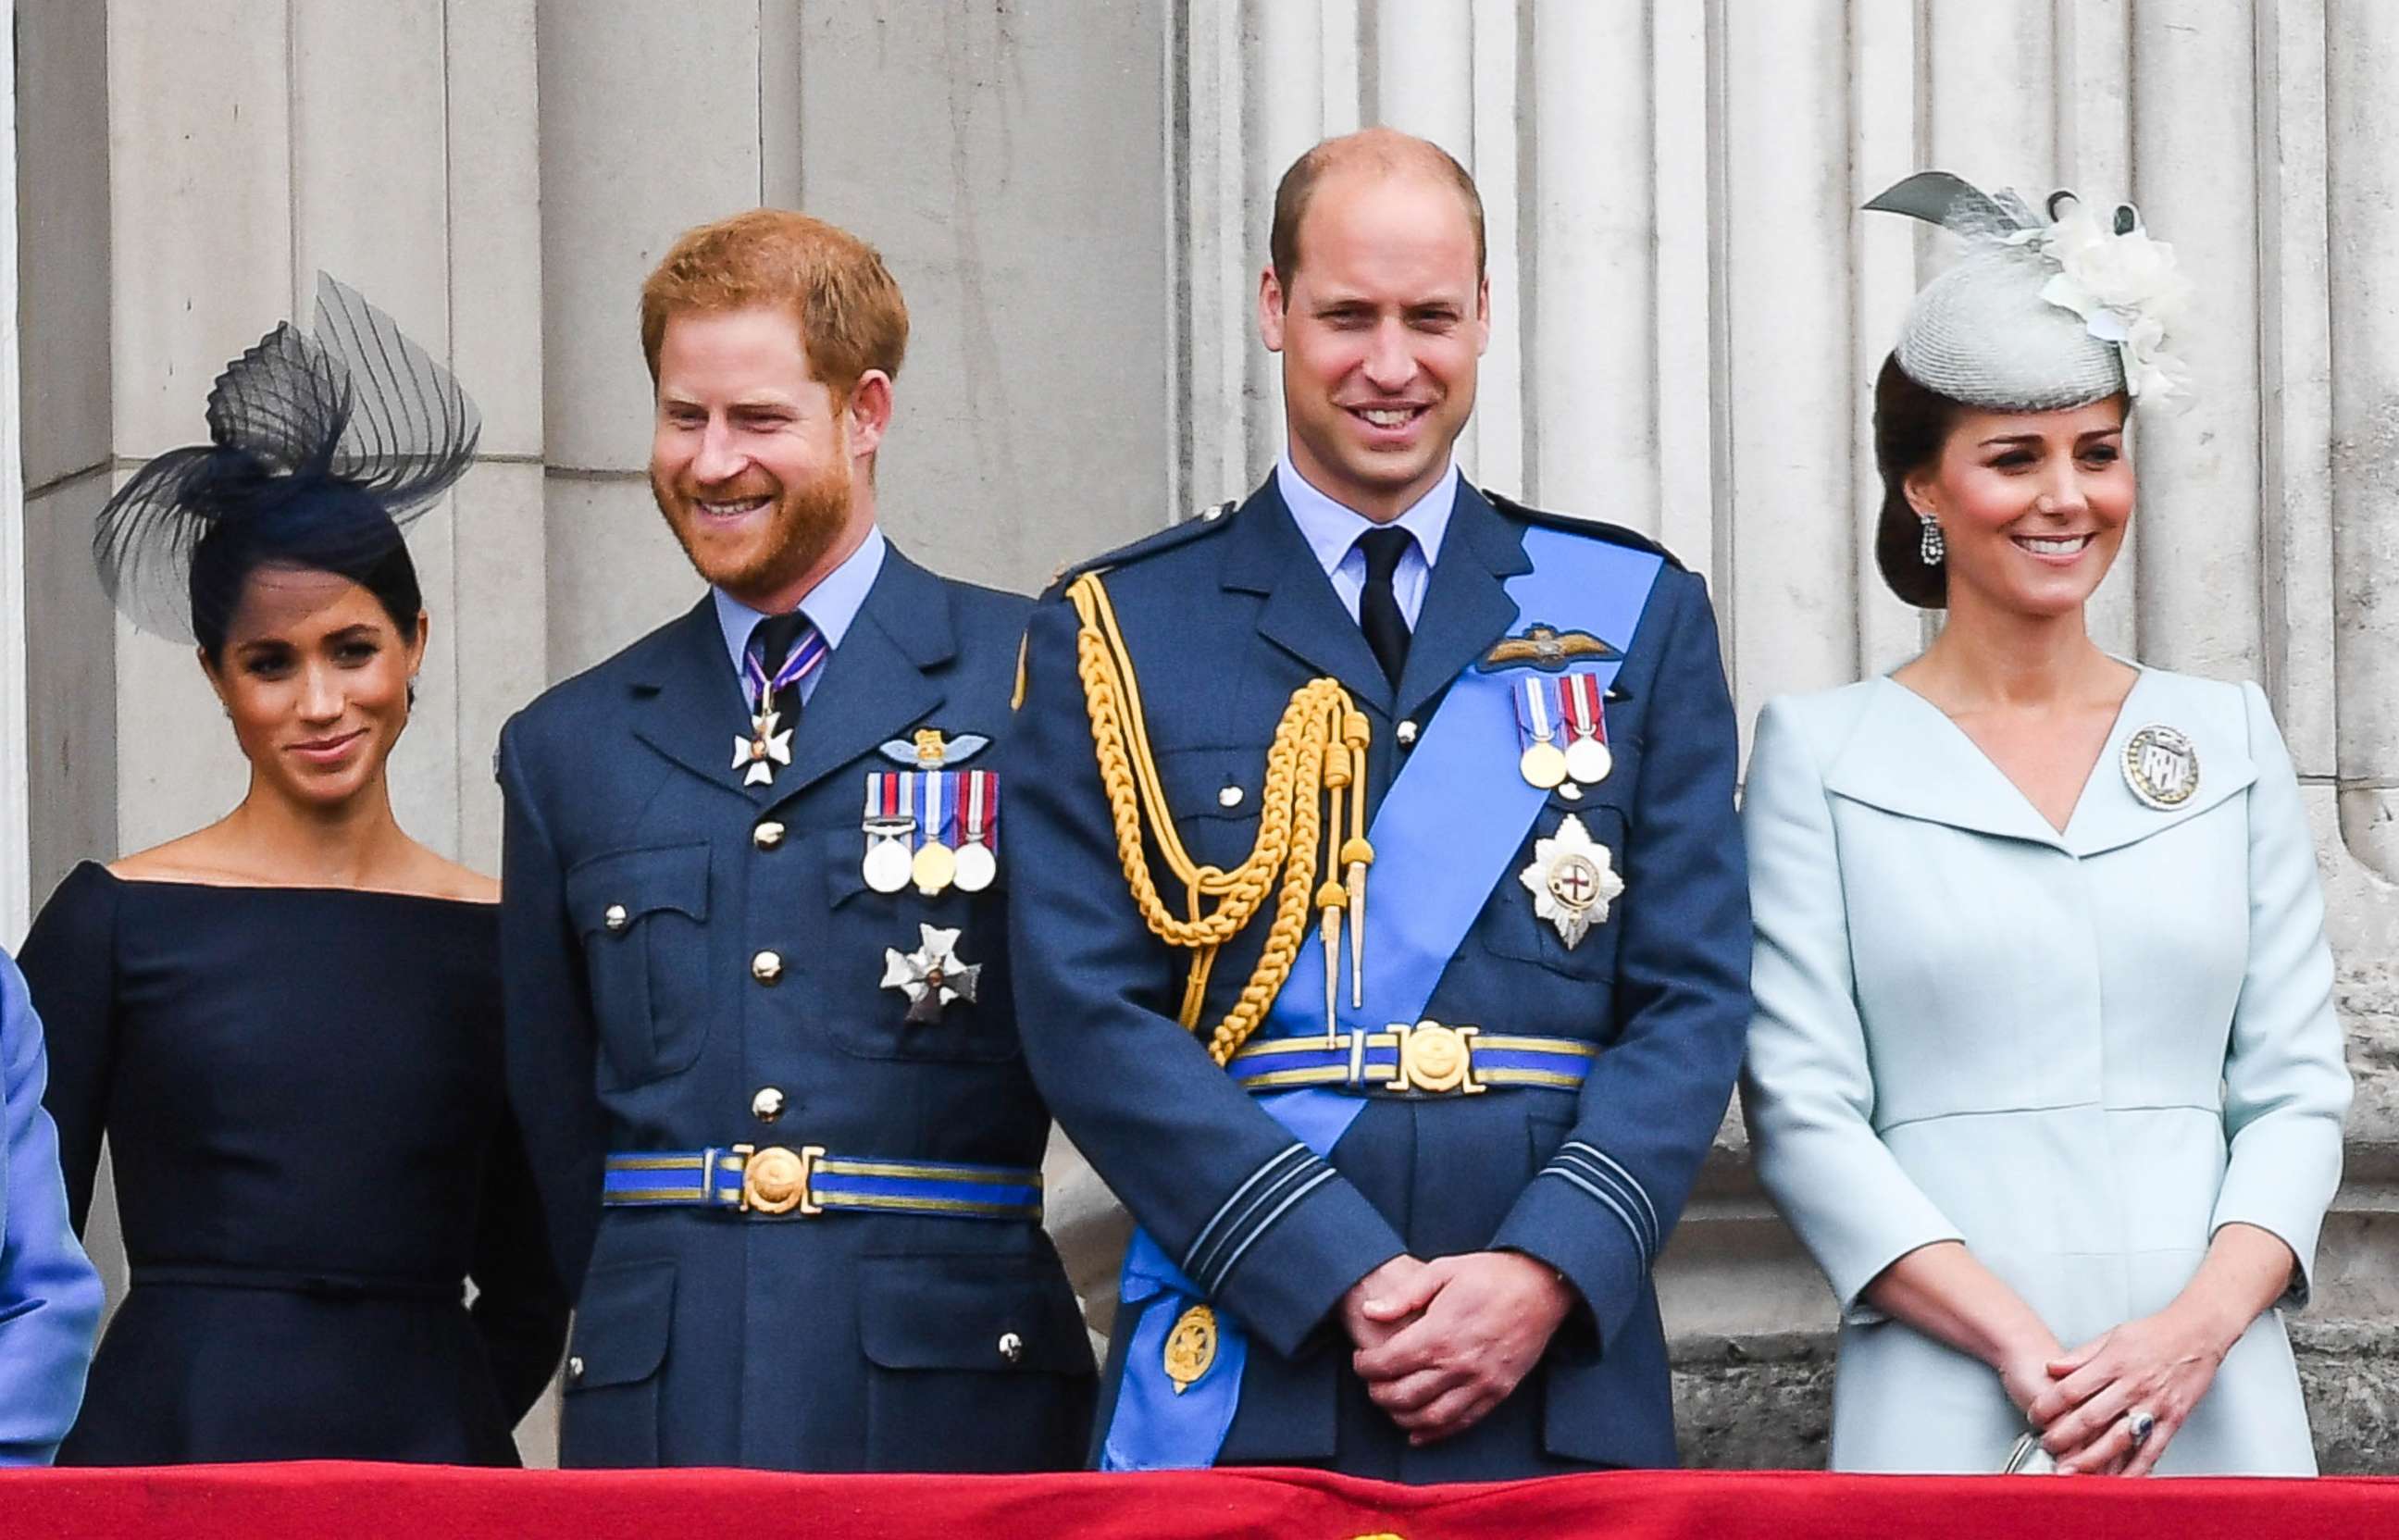 PHOTO: Meghan, Duchess of Sussex, Prince Harry, Duke of Sussex, Prince William, Duke of Cambridge and Catherine, Duchess of Cambridge stand on the balcony of Buckingham Palace, July 10, 2018 in London.